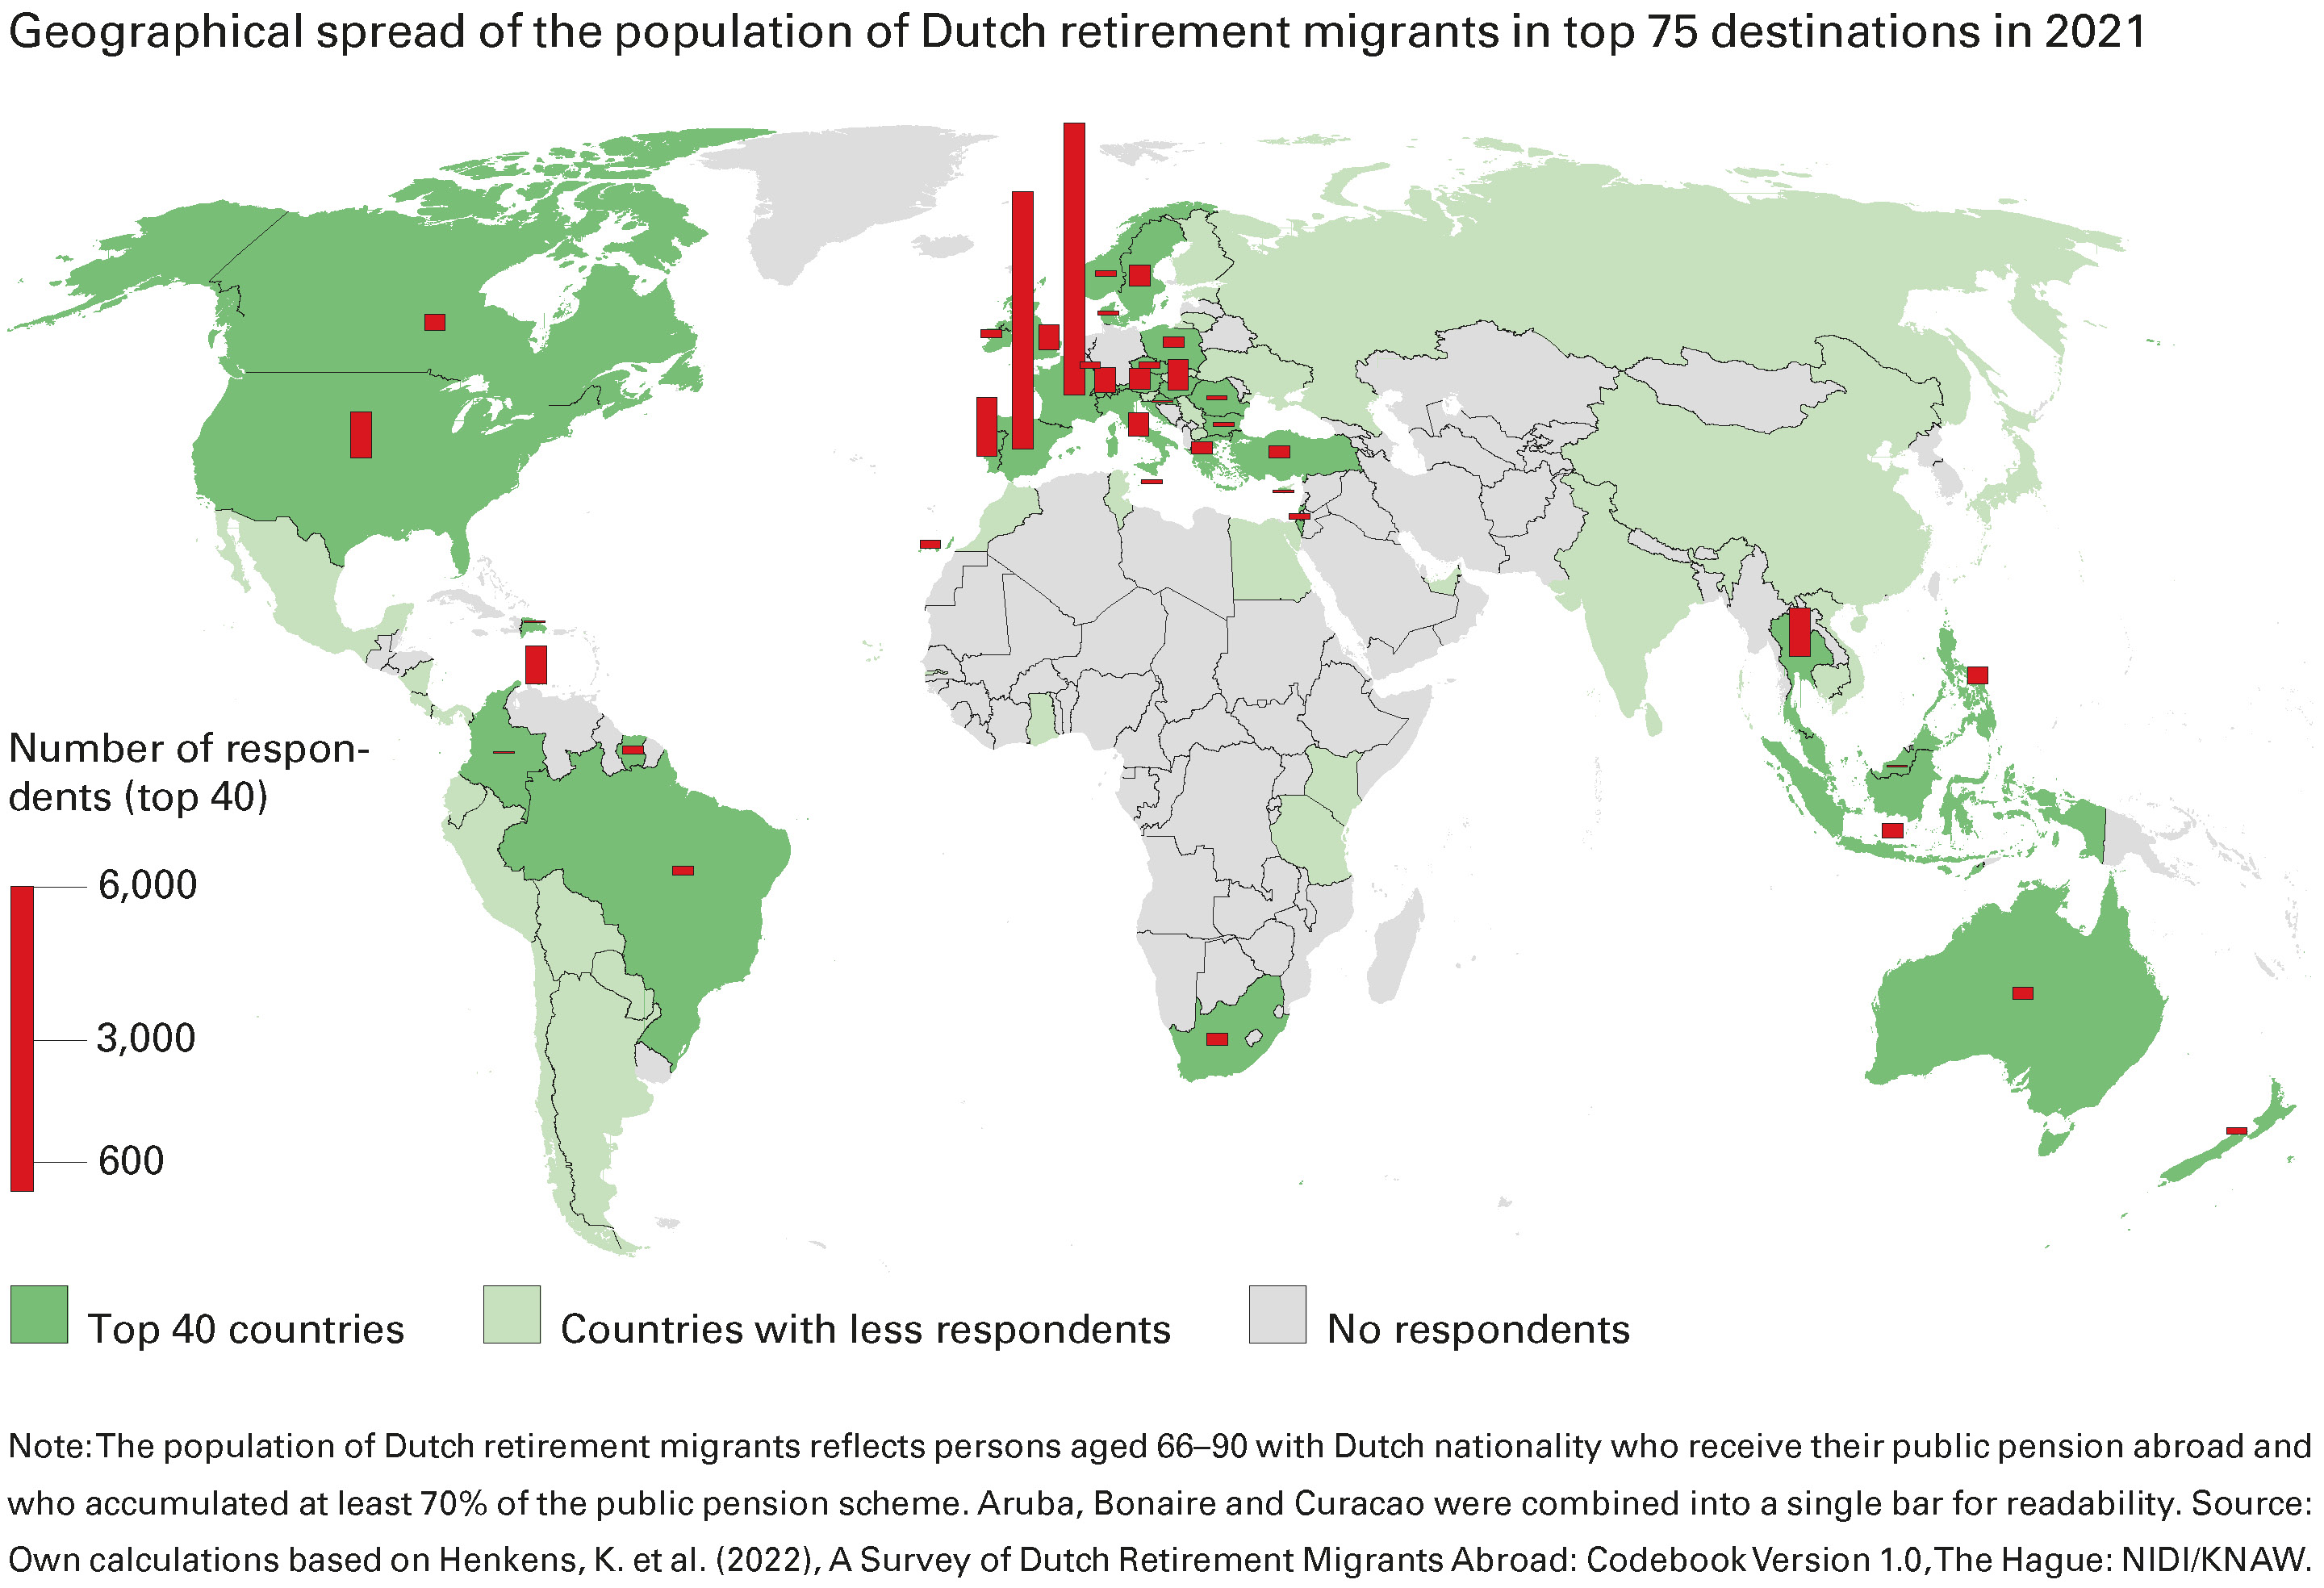 Geographical spread of the population of Dutch retirement migrants in top 75 destinations in 2021